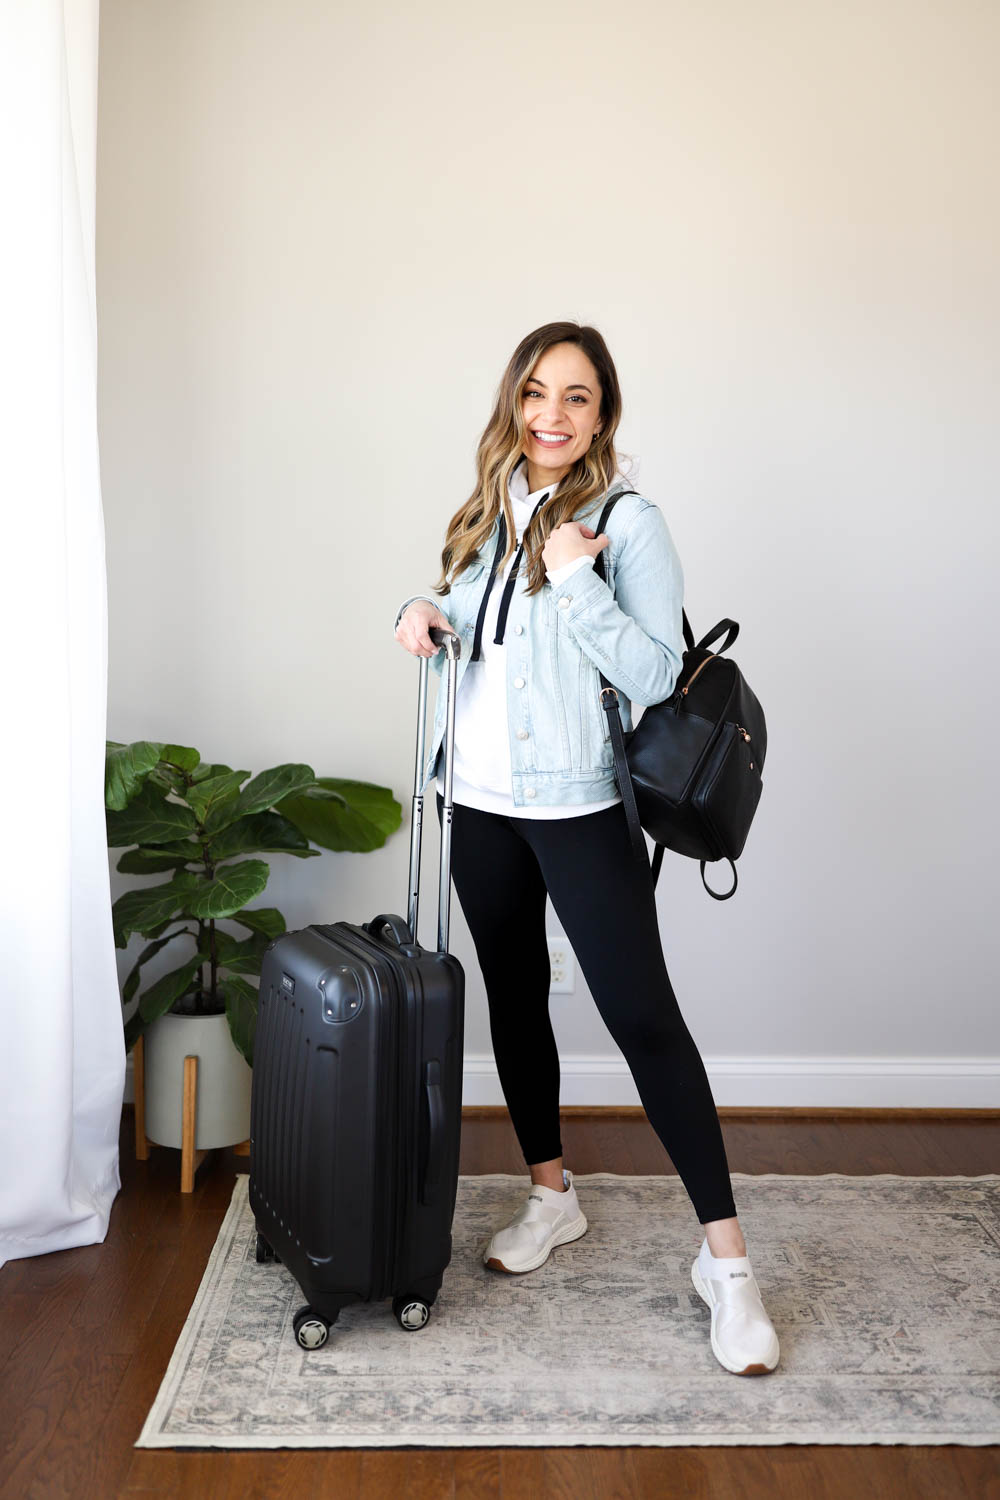 Best Travel Outfits for Women: Stylish & Comfy Picks!